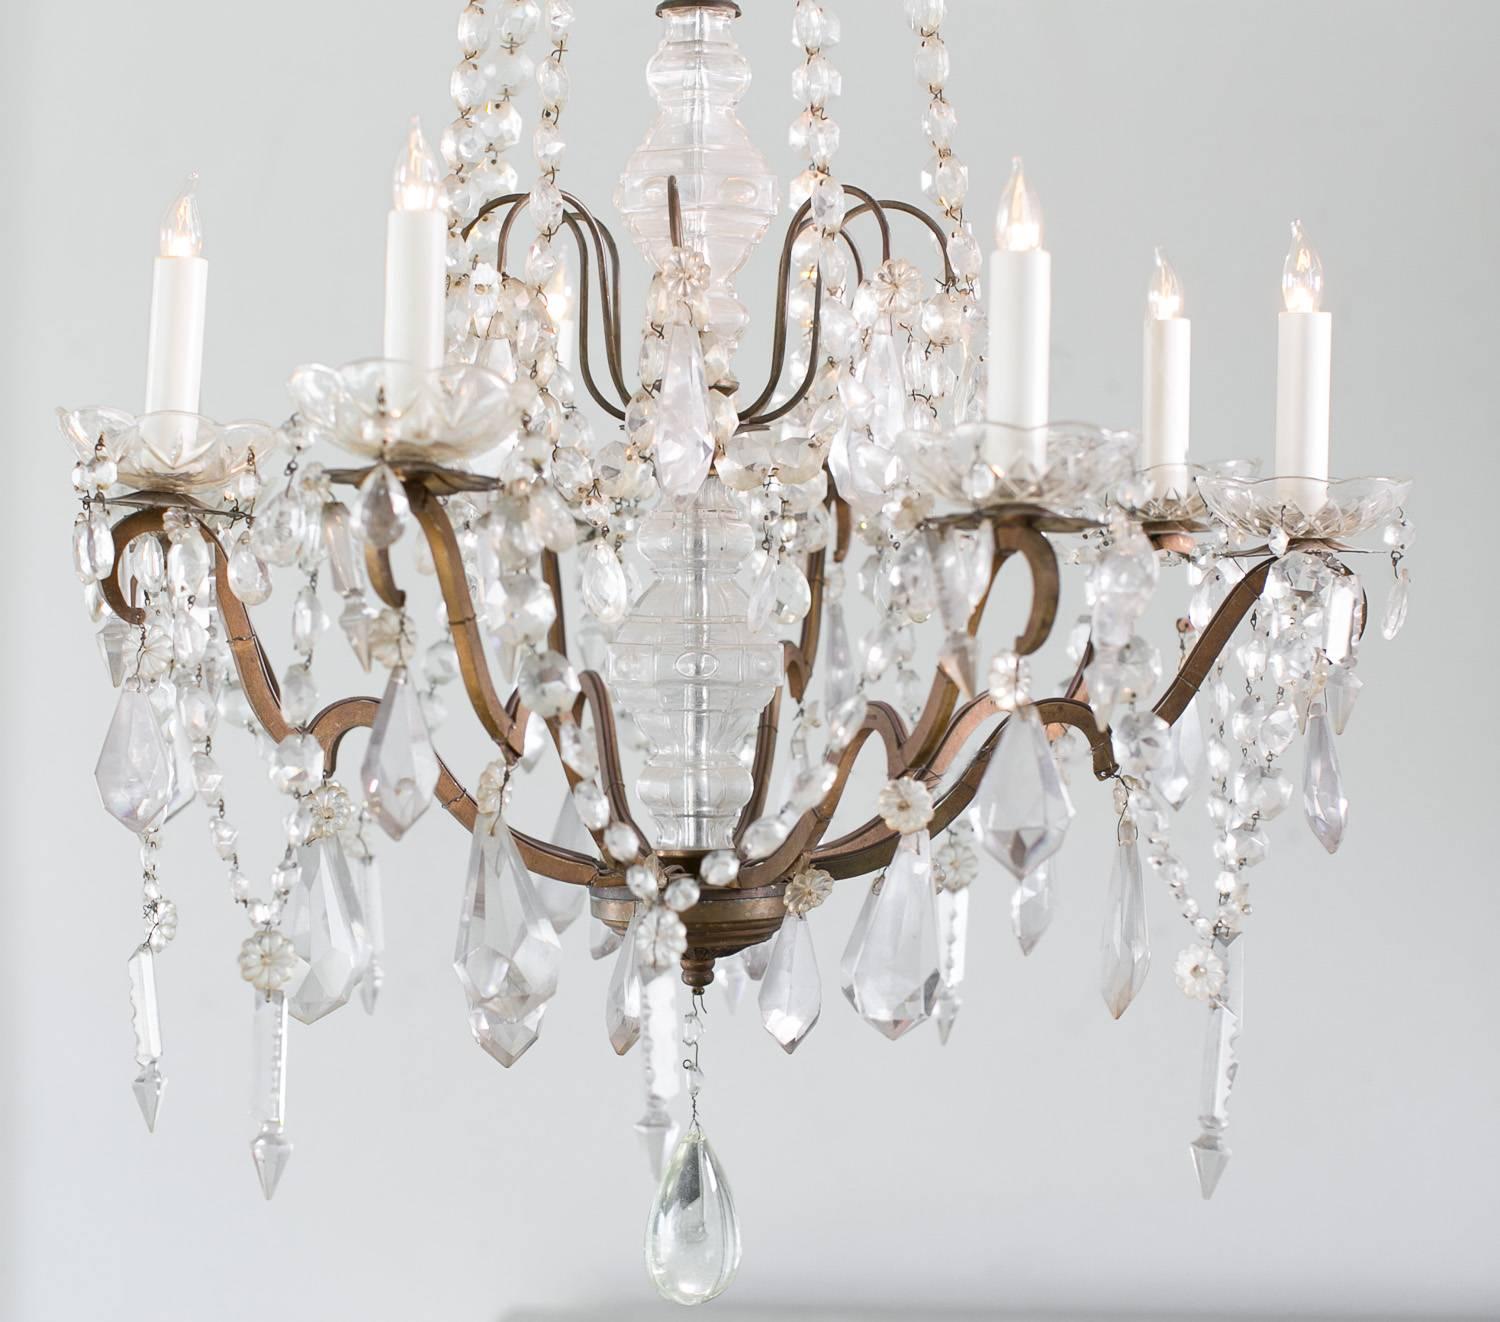 Gorgeous chandelier with heavy crystals, elegantly draped beads cascade downward from the center and connect to the eight arms. Candles are cupped in etched crystal bowls and connected with darts. Center piece is covered in glass. Metal is